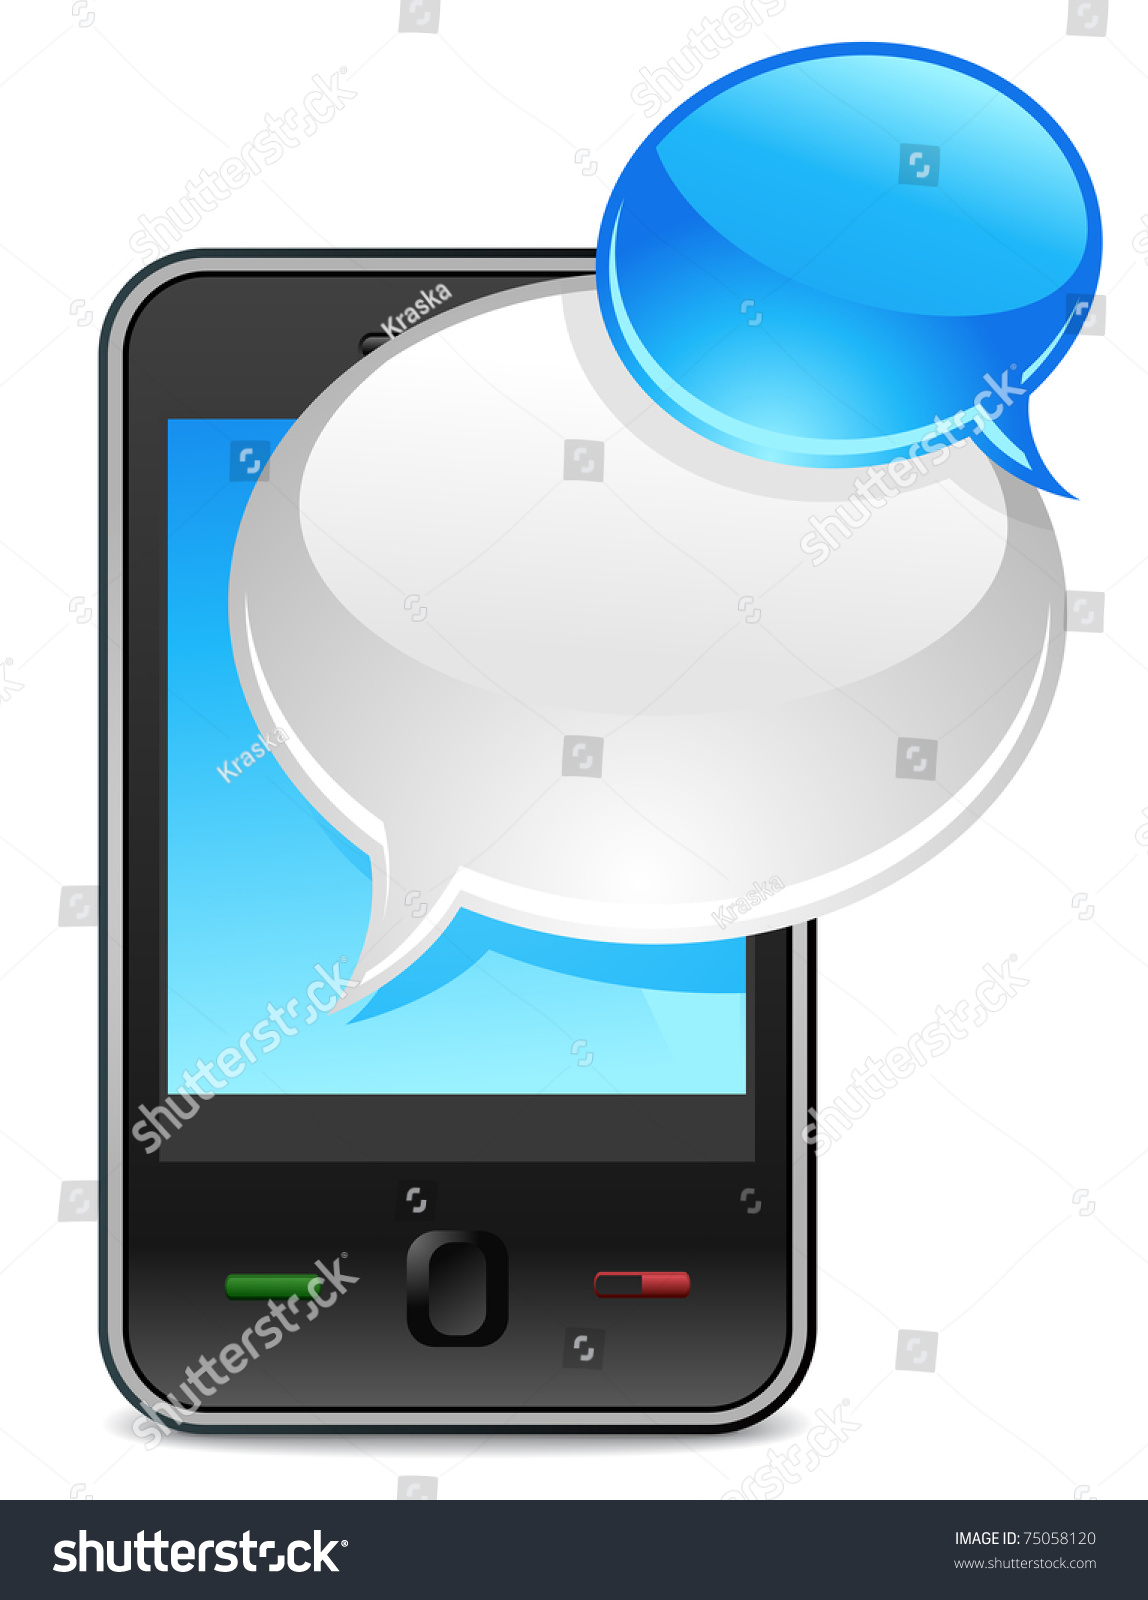 mobile phone text clipart - photo #11